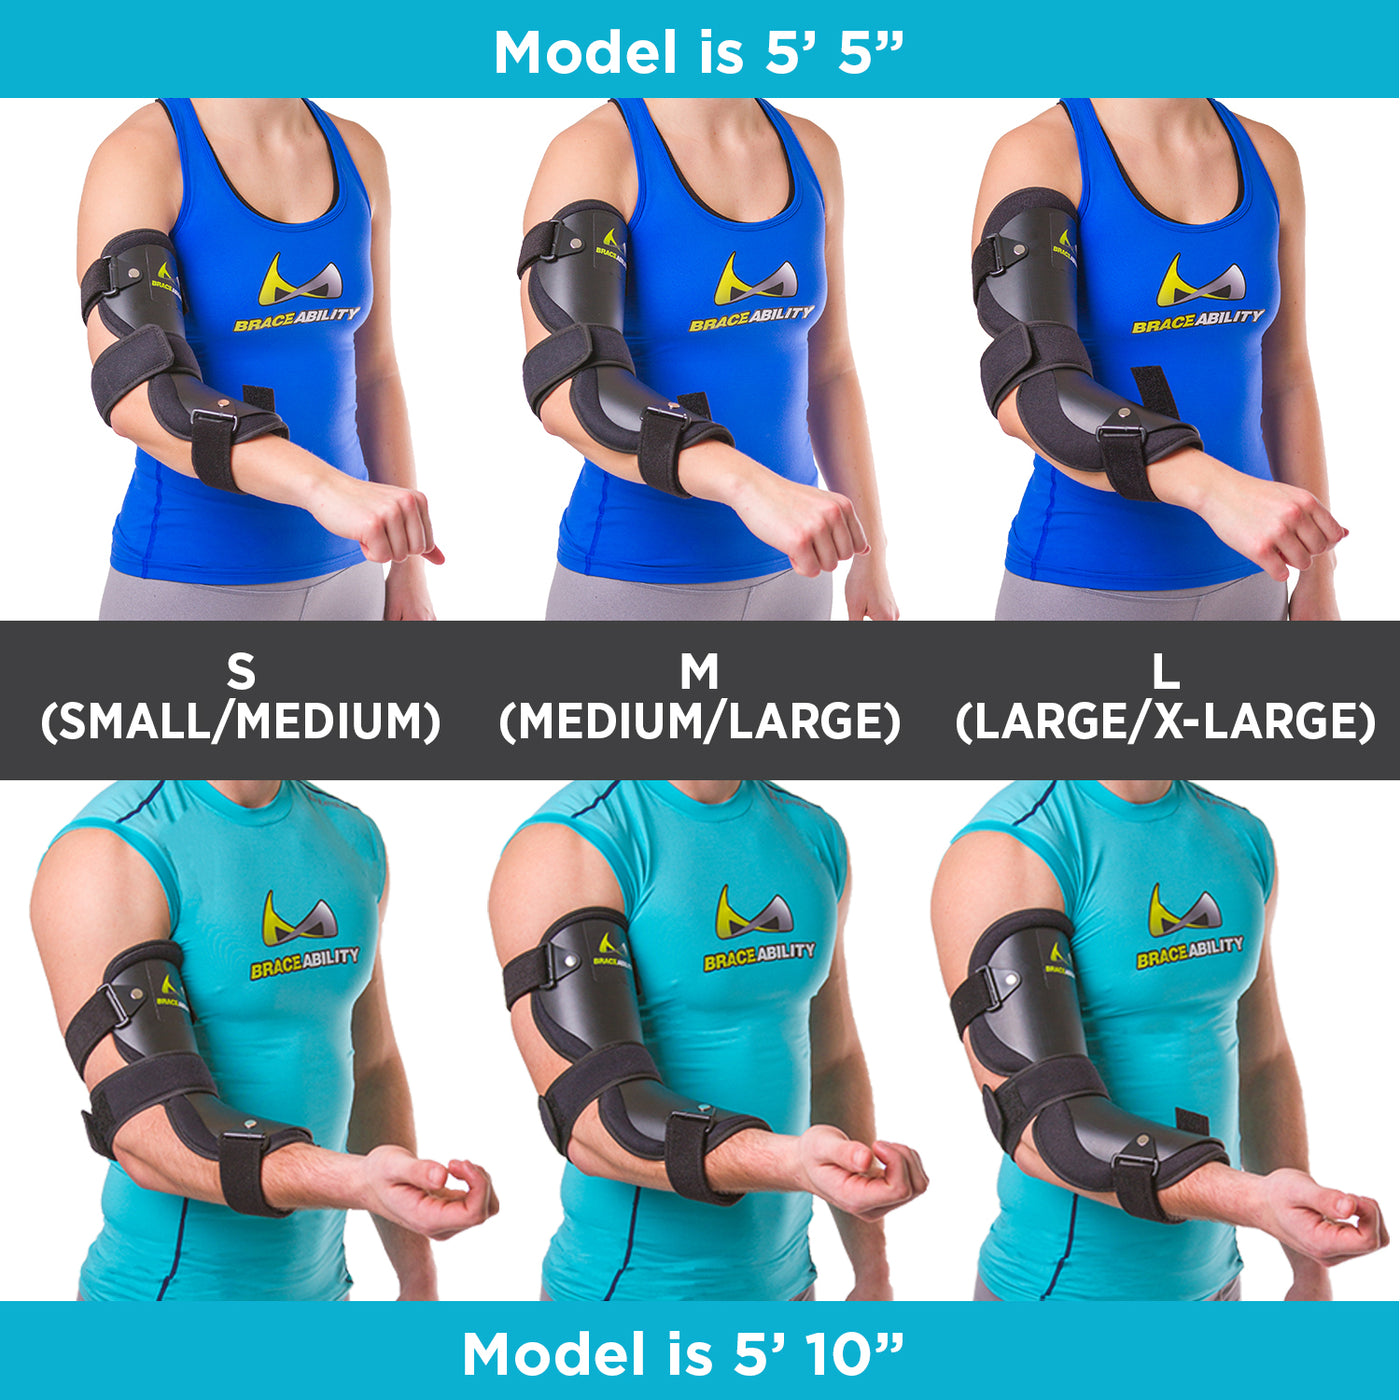 The three different lengths of cubital tunnel brace fit differently on different size body frames